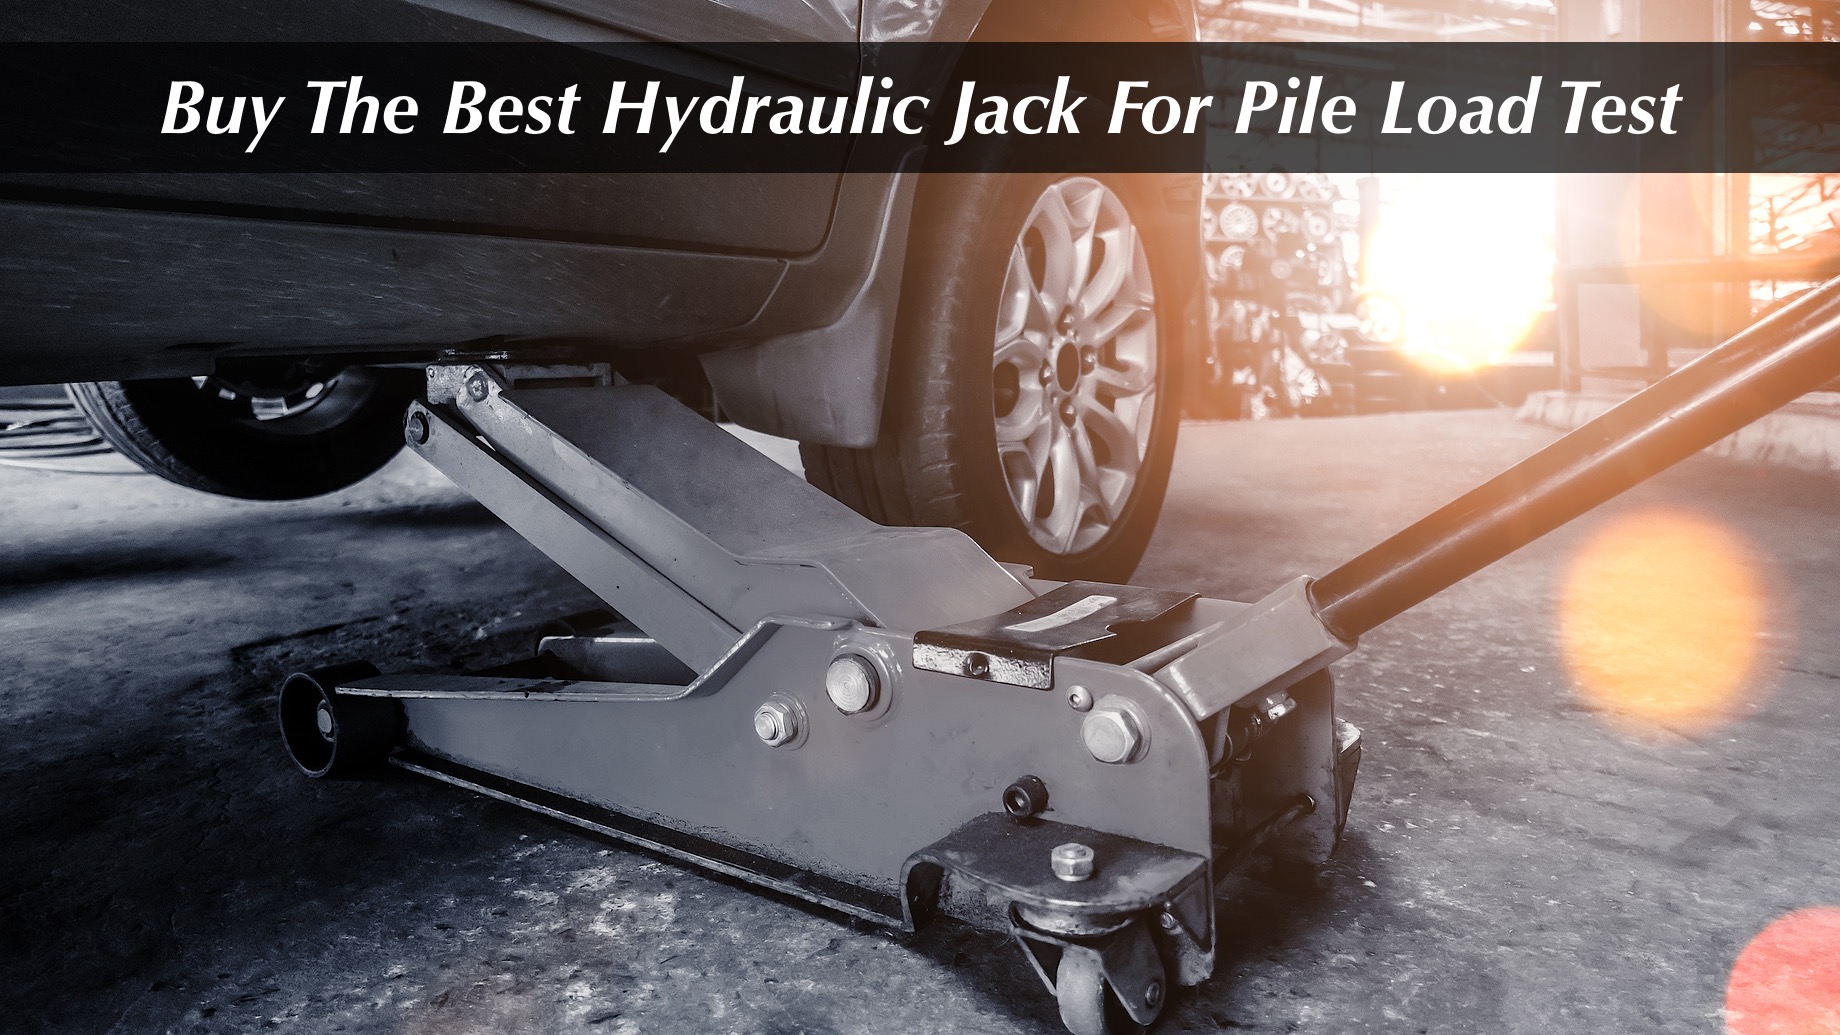 Buy The Best Hydraulic Jack For Pile Load Test